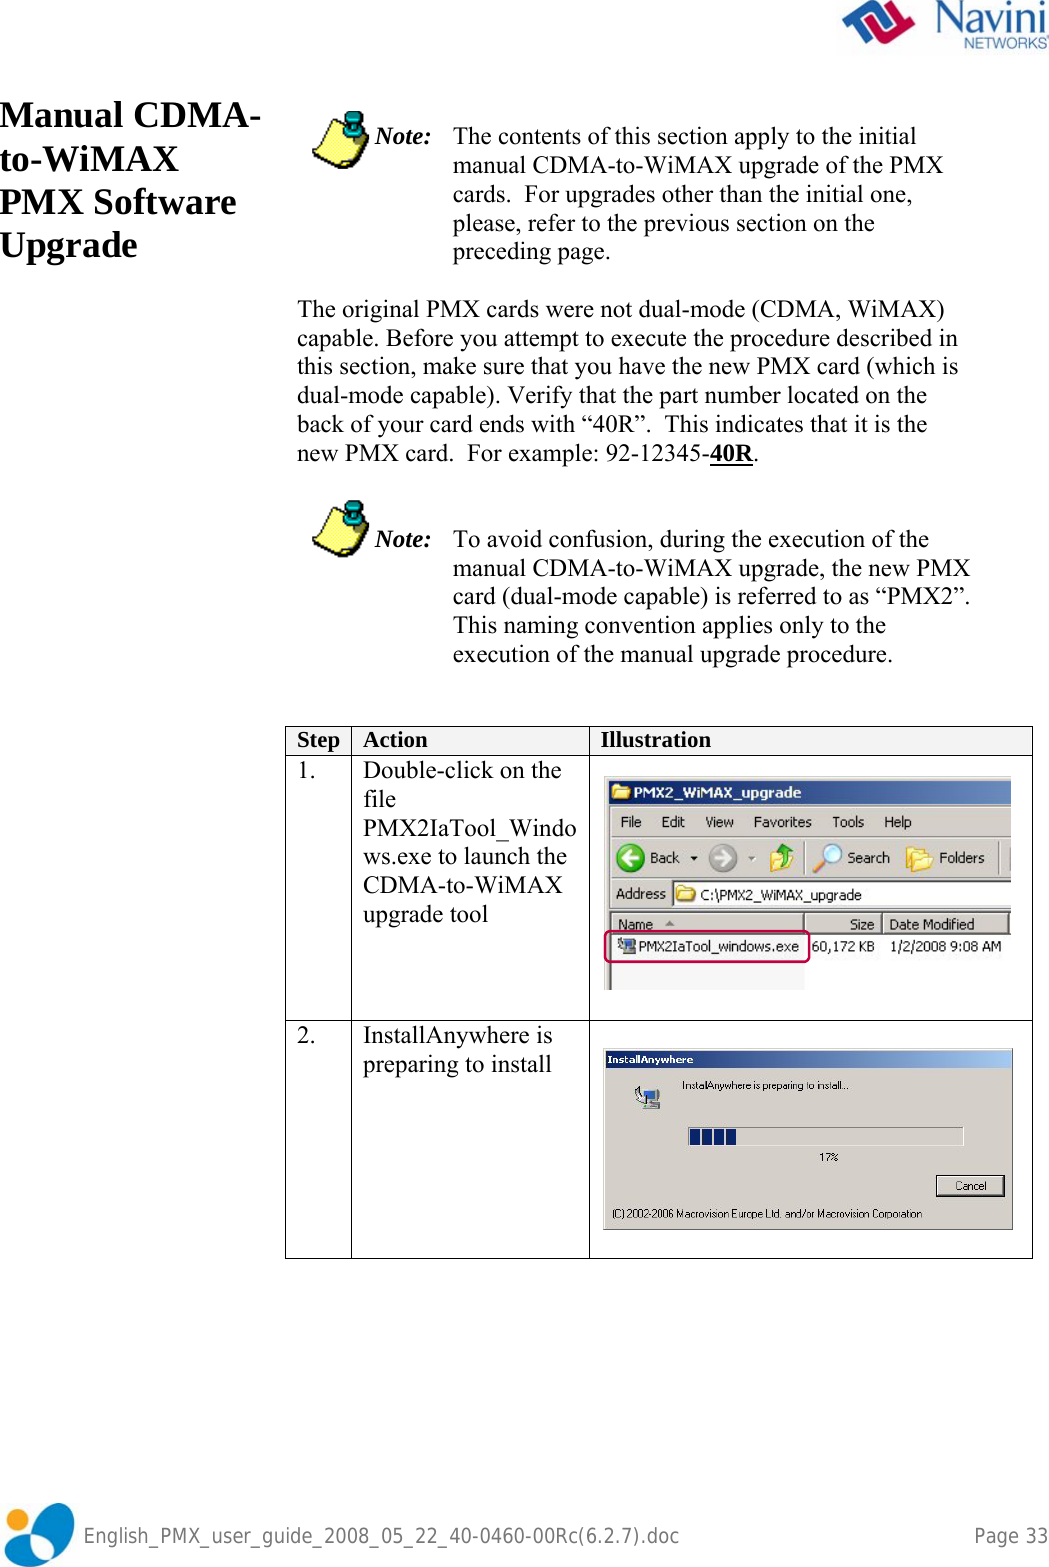               English_PMX_user_guide_2008_05_22_40-0460-00Rc(6.2.7).doc    Page 33 Manual CDMA-to-WiMAX PMX Software Upgrade   Note:  The contents of this section apply to the initial manual CDMA-to-WiMAX upgrade of the PMX cards.  For upgrades other than the initial one, please, refer to the previous section on the preceding page.  The original PMX cards were not dual-mode (CDMA, WiMAX) capable. Before you attempt to execute the procedure described in this section, make sure that you have the new PMX card (which is dual-mode capable). Verify that the part number located on the back of your card ends with “40R”.  This indicates that it is the new PMX card.  For example: 92-12345-40R.   Note:  To avoid confusion, during the execution of the manual CDMA-to-WiMAX upgrade, the new PMX card (dual-mode capable) is referred to as “PMX2”. This naming convention applies only to the execution of the manual upgrade procedure.   Step  Action  Illustration 1.  Double-click on the file PMX2IaTool_Windows.exe to launch the CDMA-to-WiMAX upgrade tool  2. InstallAnywhere is preparing to install  